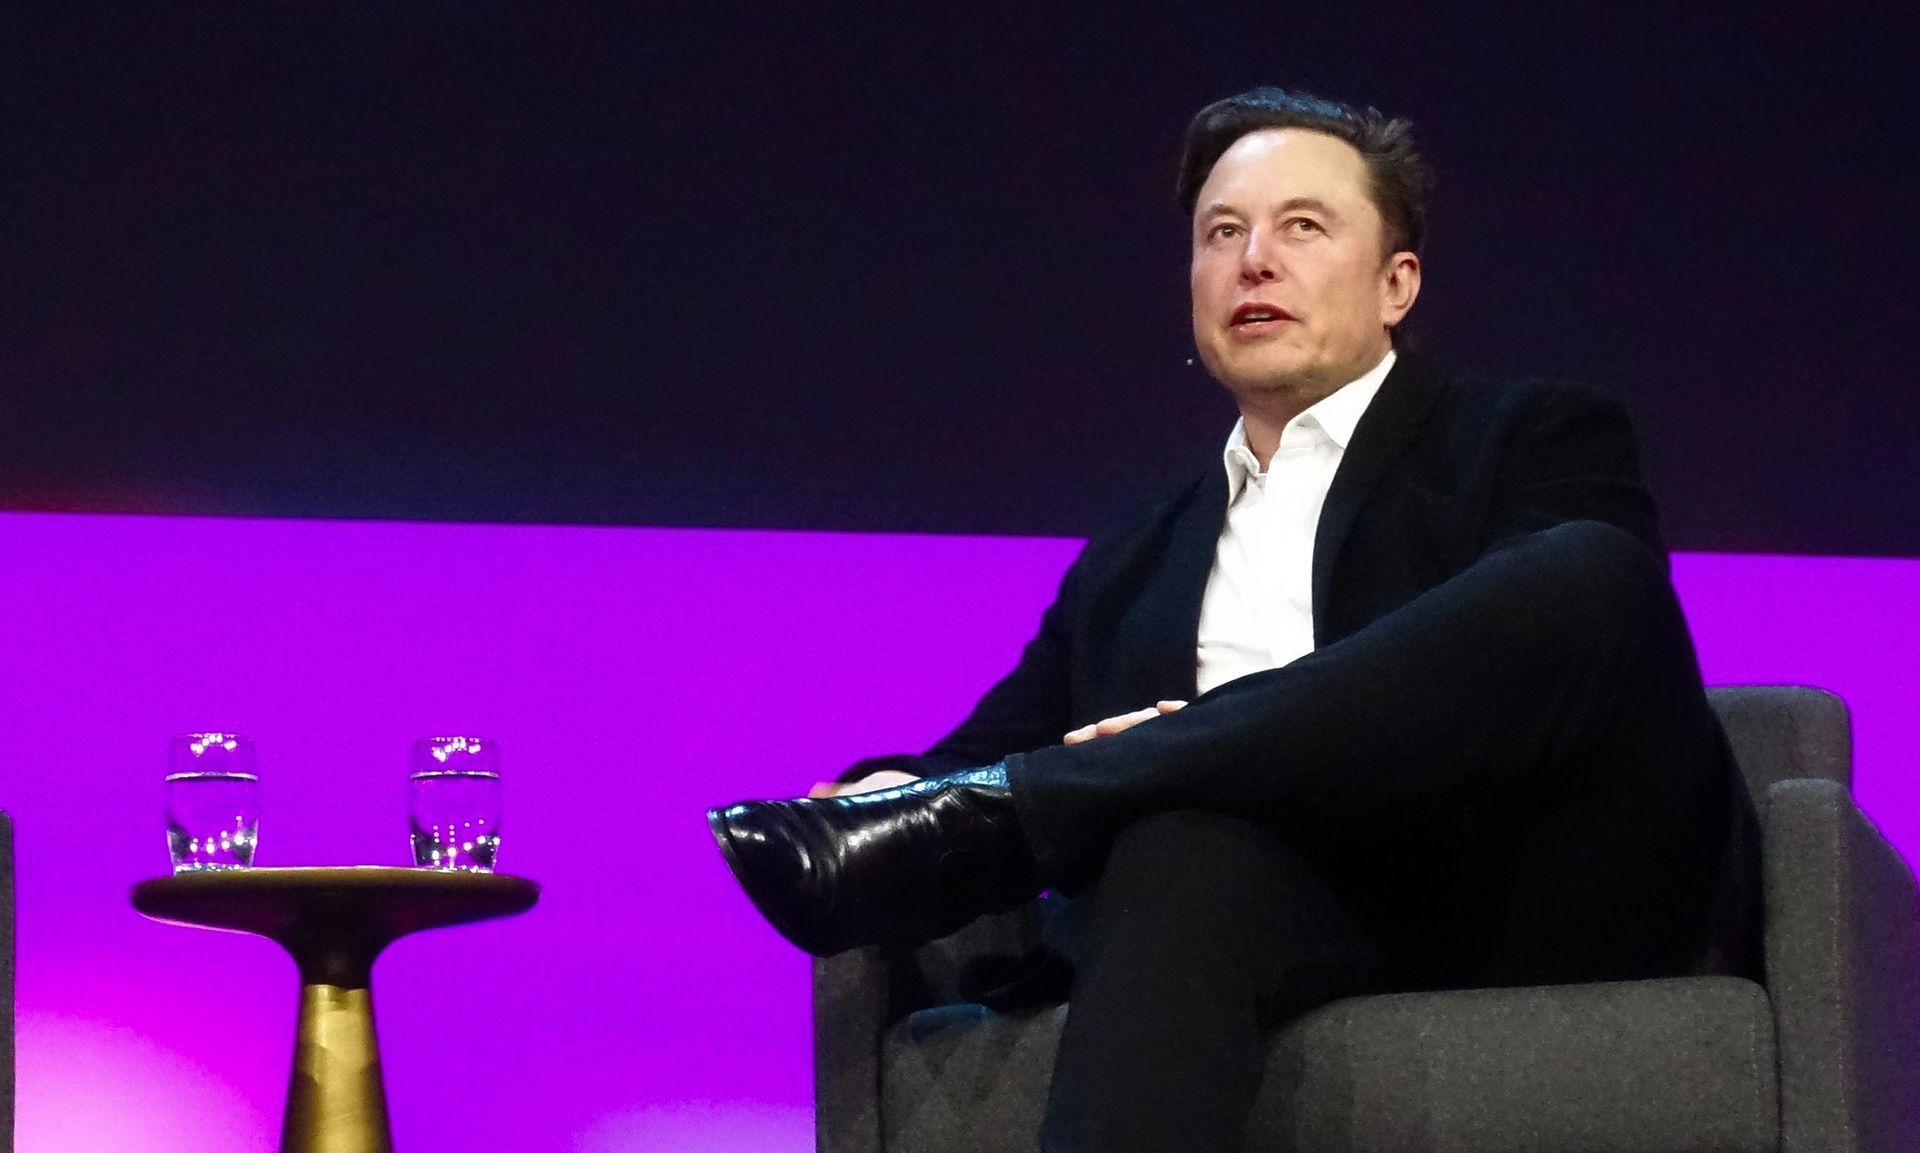 Elon Musk’s criticism about ChatGPT’s “woke” nature gets response from OpenAI co-founder